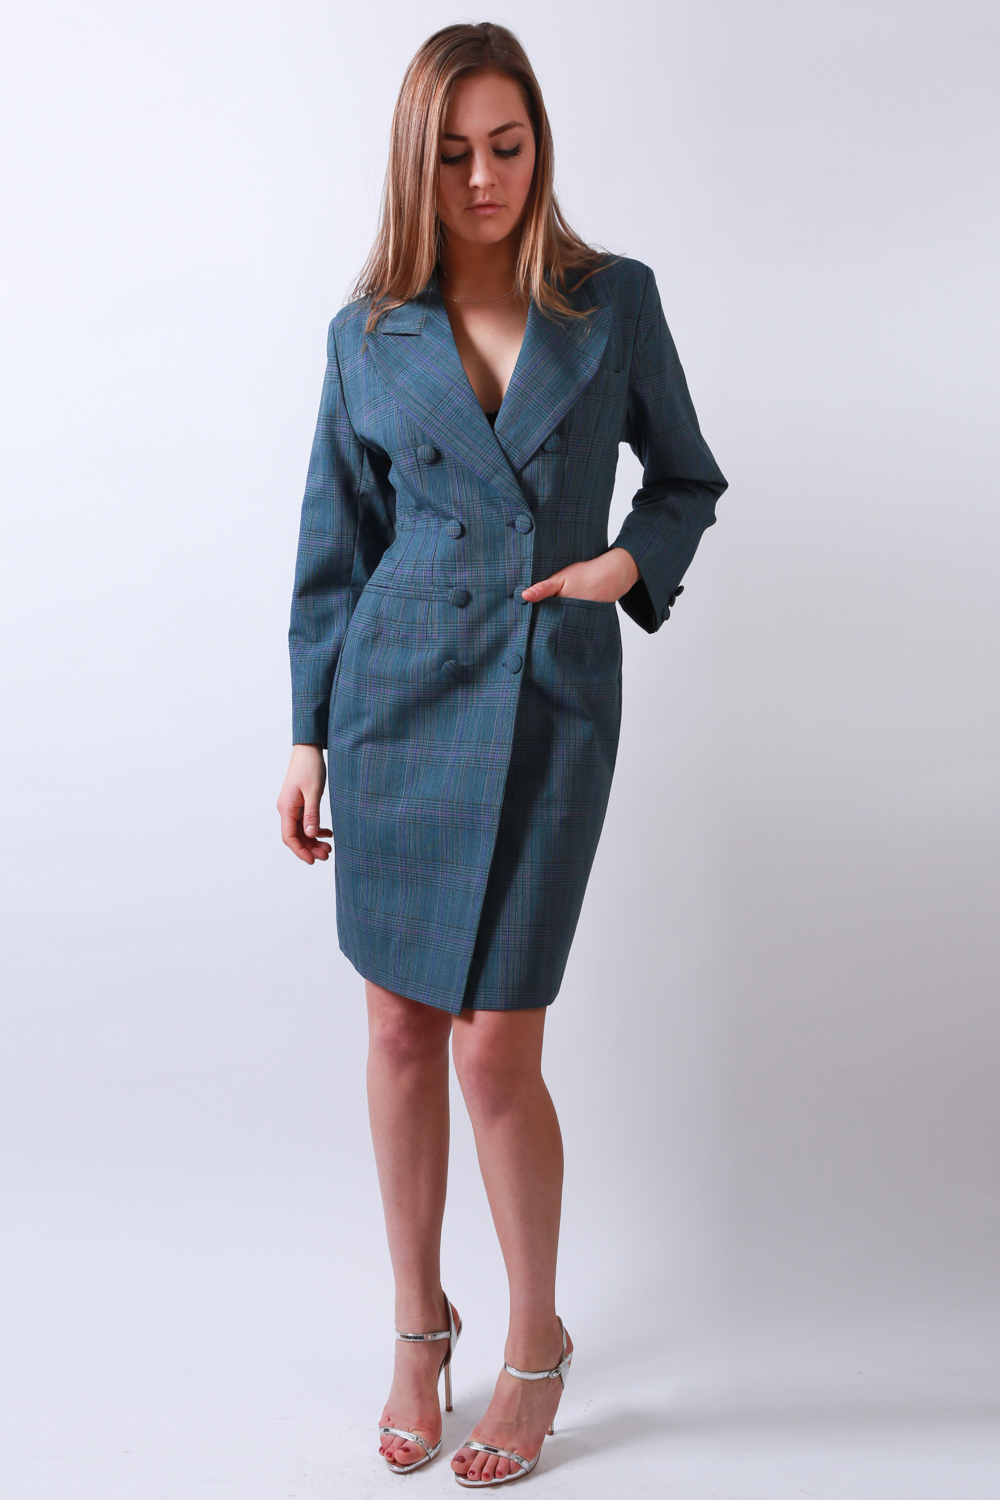 9½ WEEK FORM FITTED COAT DRESS IN ENGLISH HABIT ⋆ House of Avida